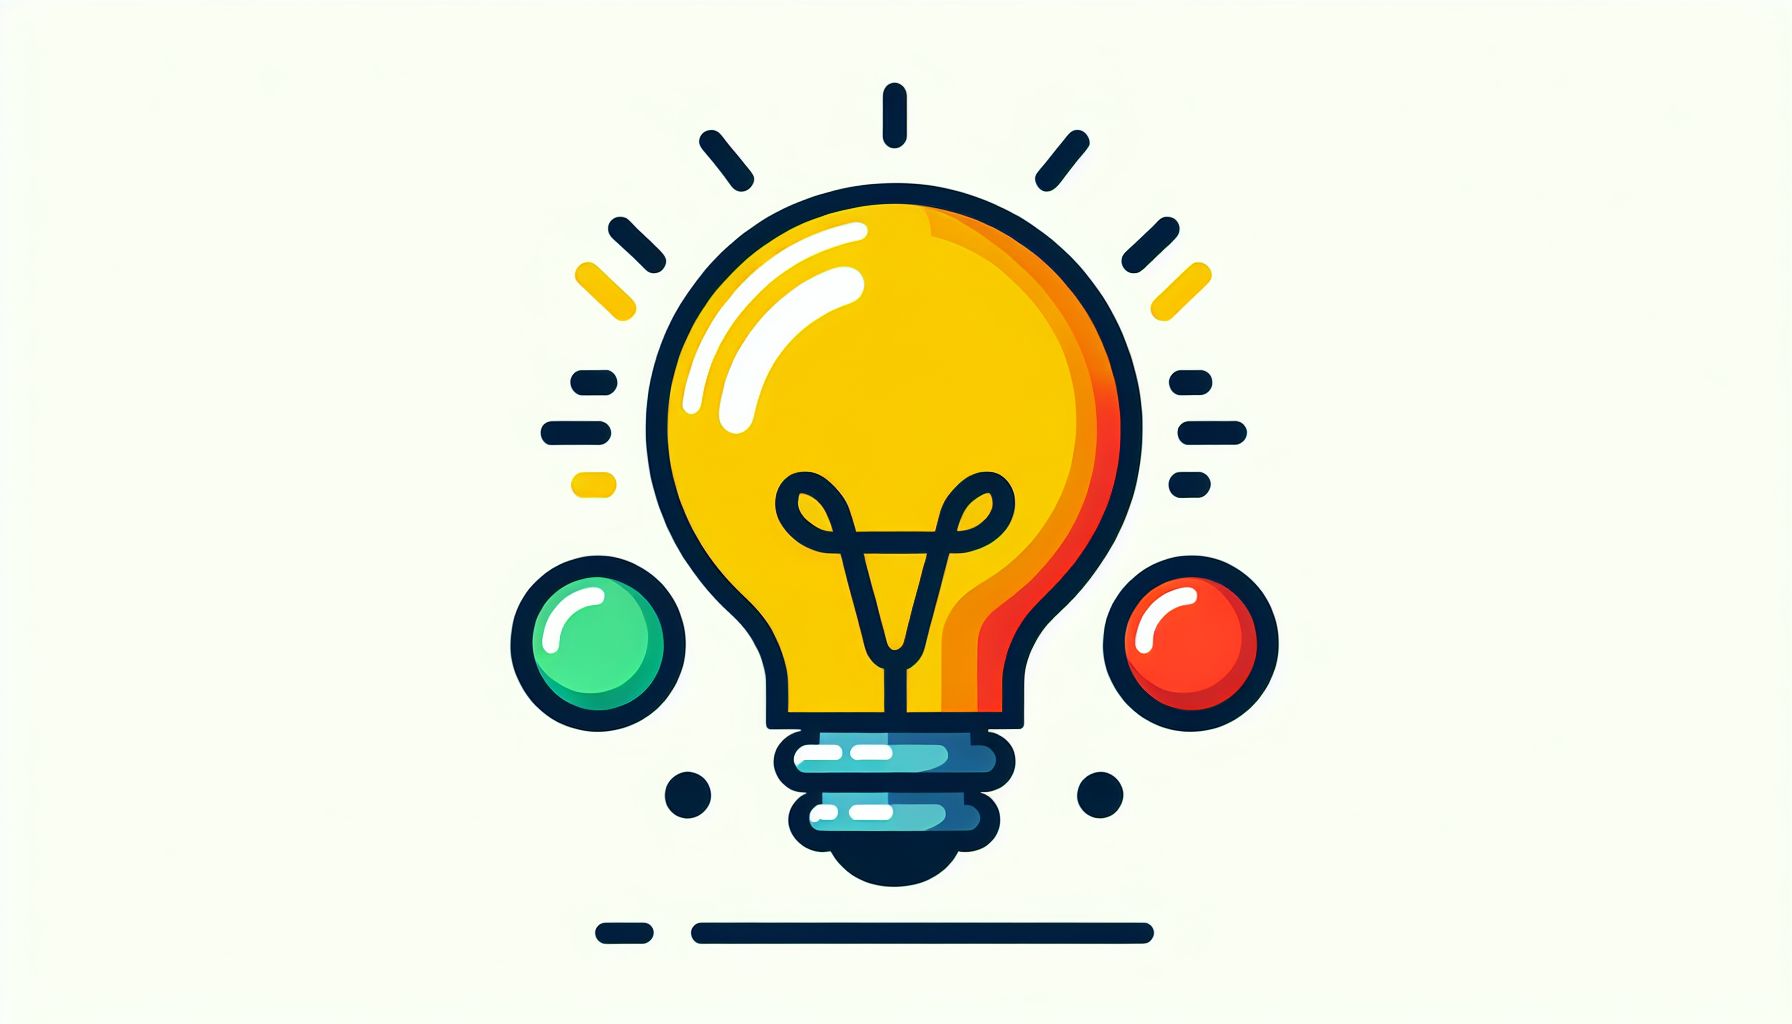 Lightbulb in flat illustration style and white background, red #f47574, green #88c7a8, yellow #fcc44b, and blue #645bc8 colors.